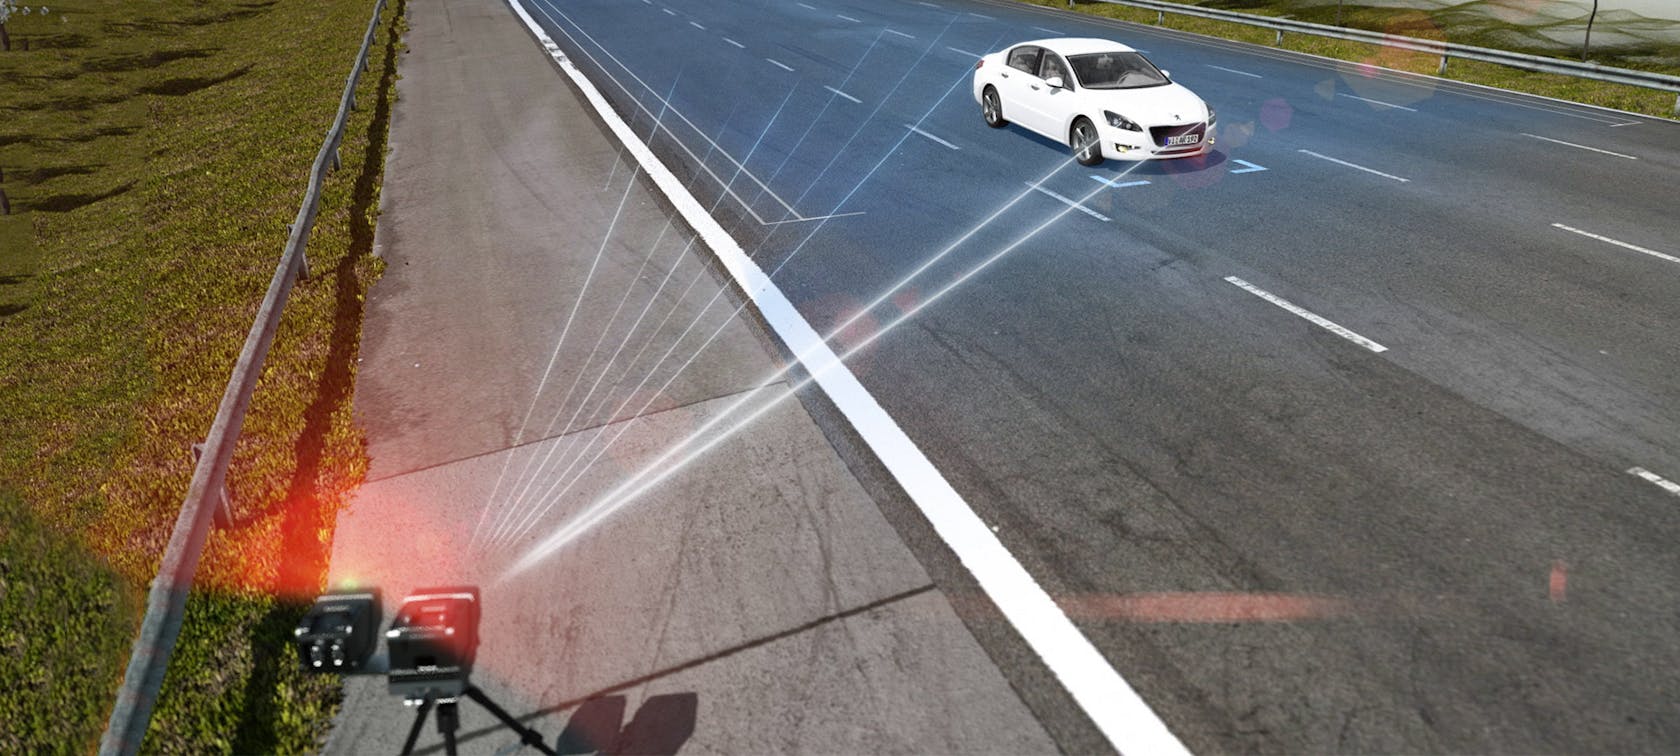 Precise speed enforcement with scanning LIDAR measuring technology								